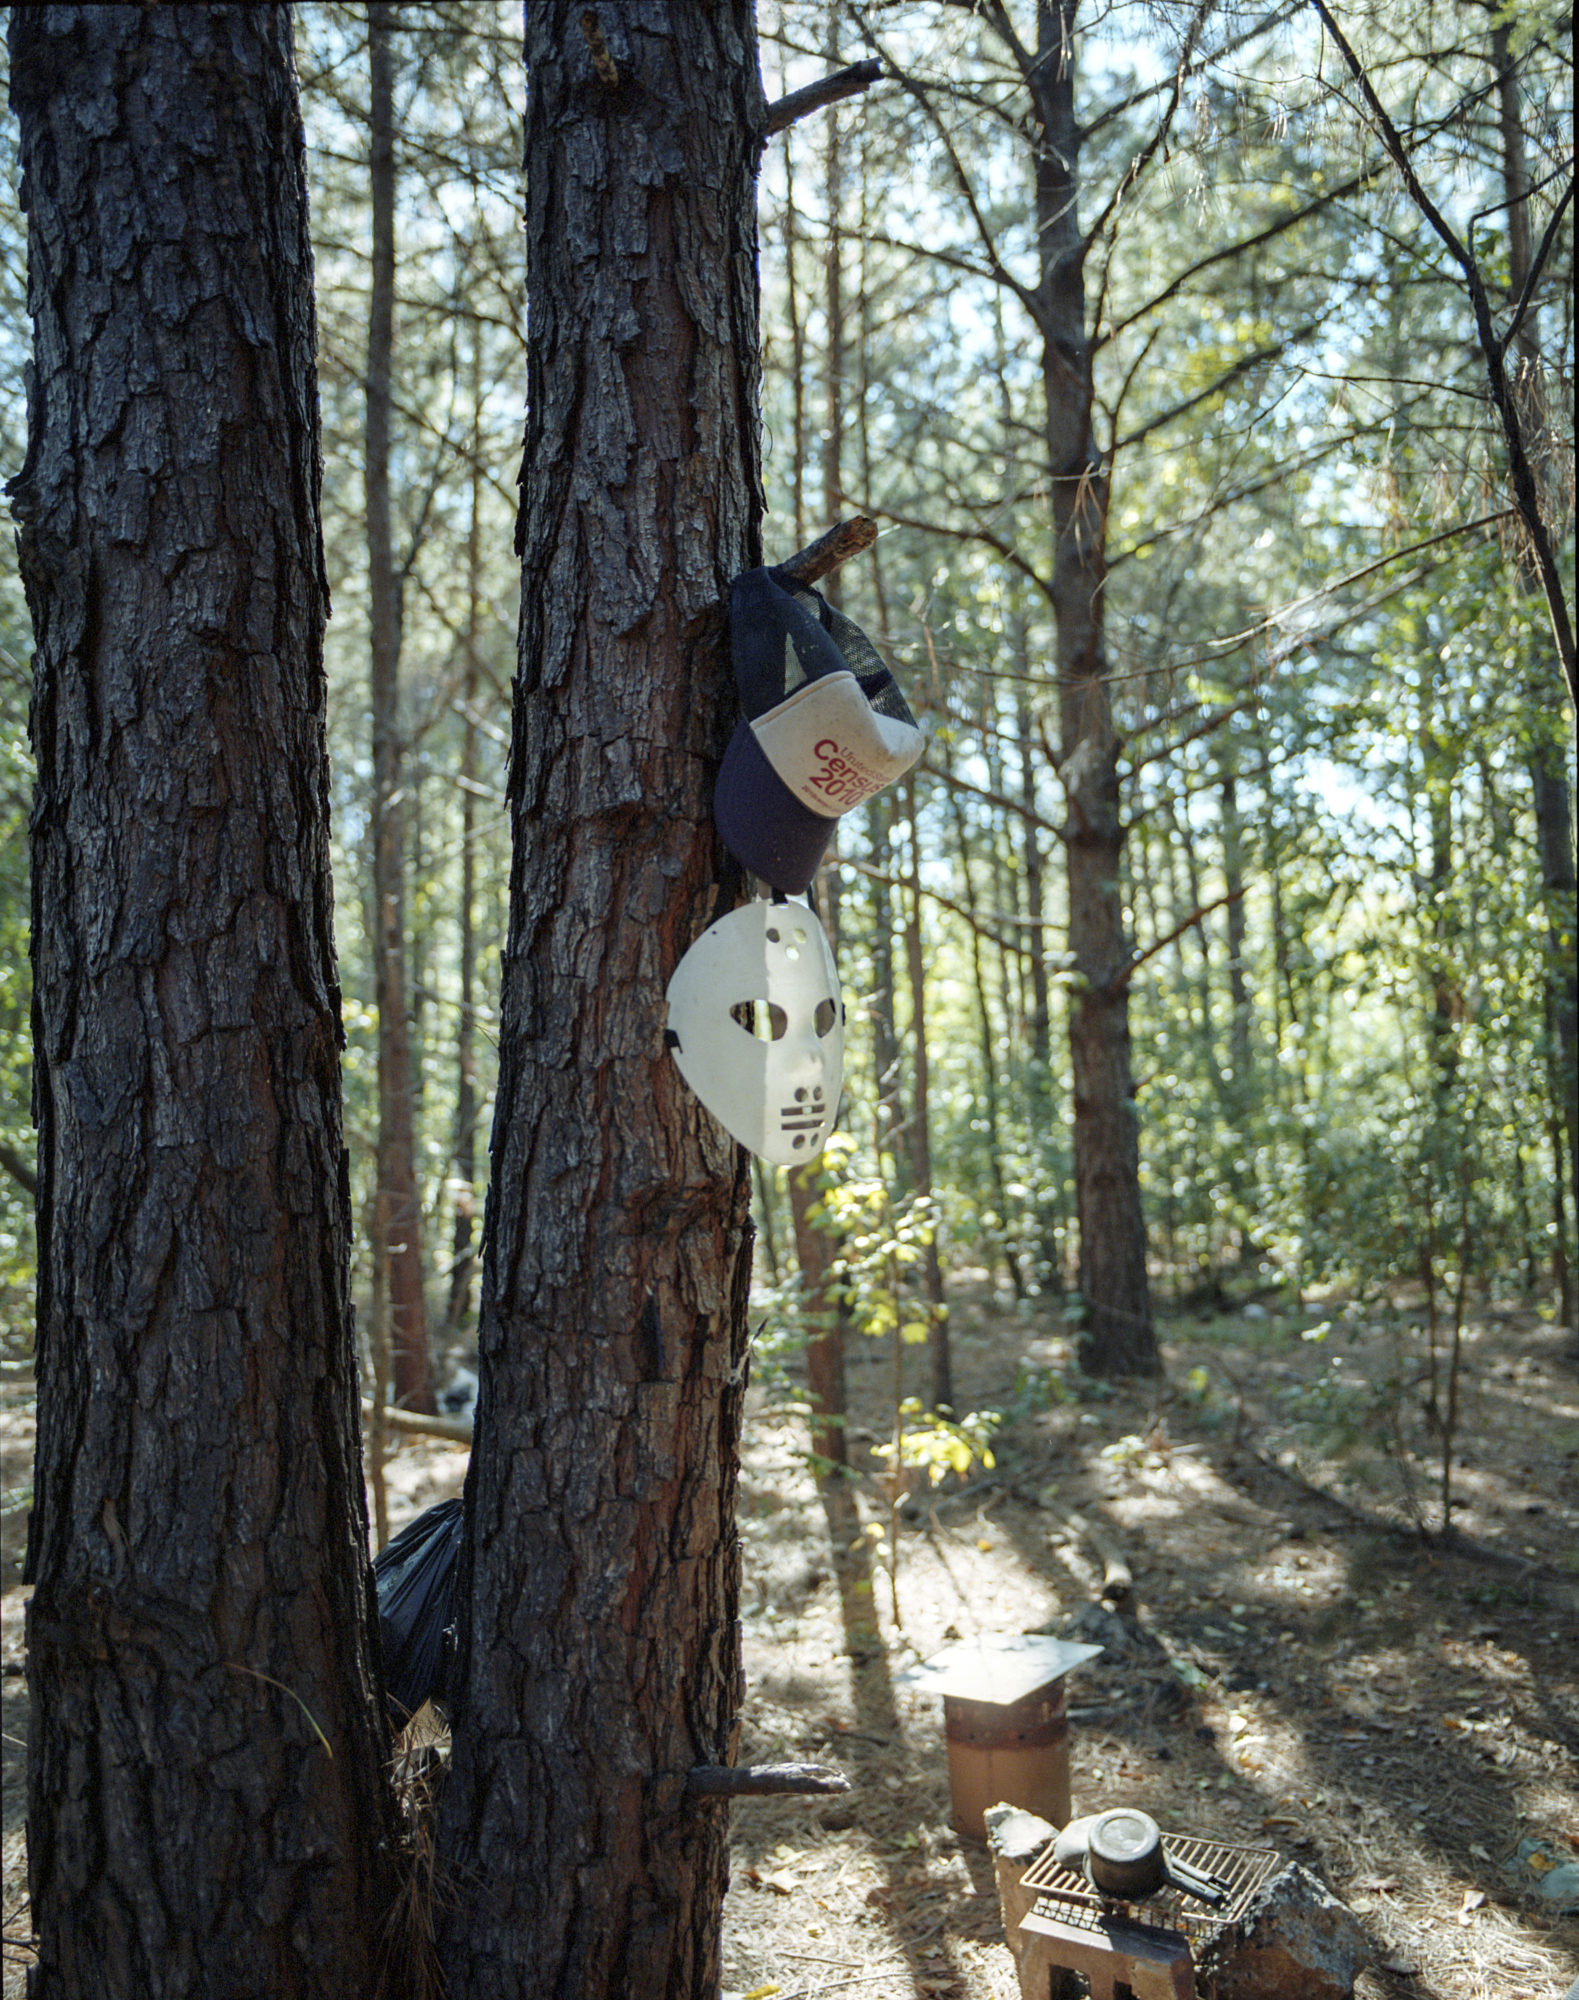 A hat and hockey mask hang on a tree in the woods